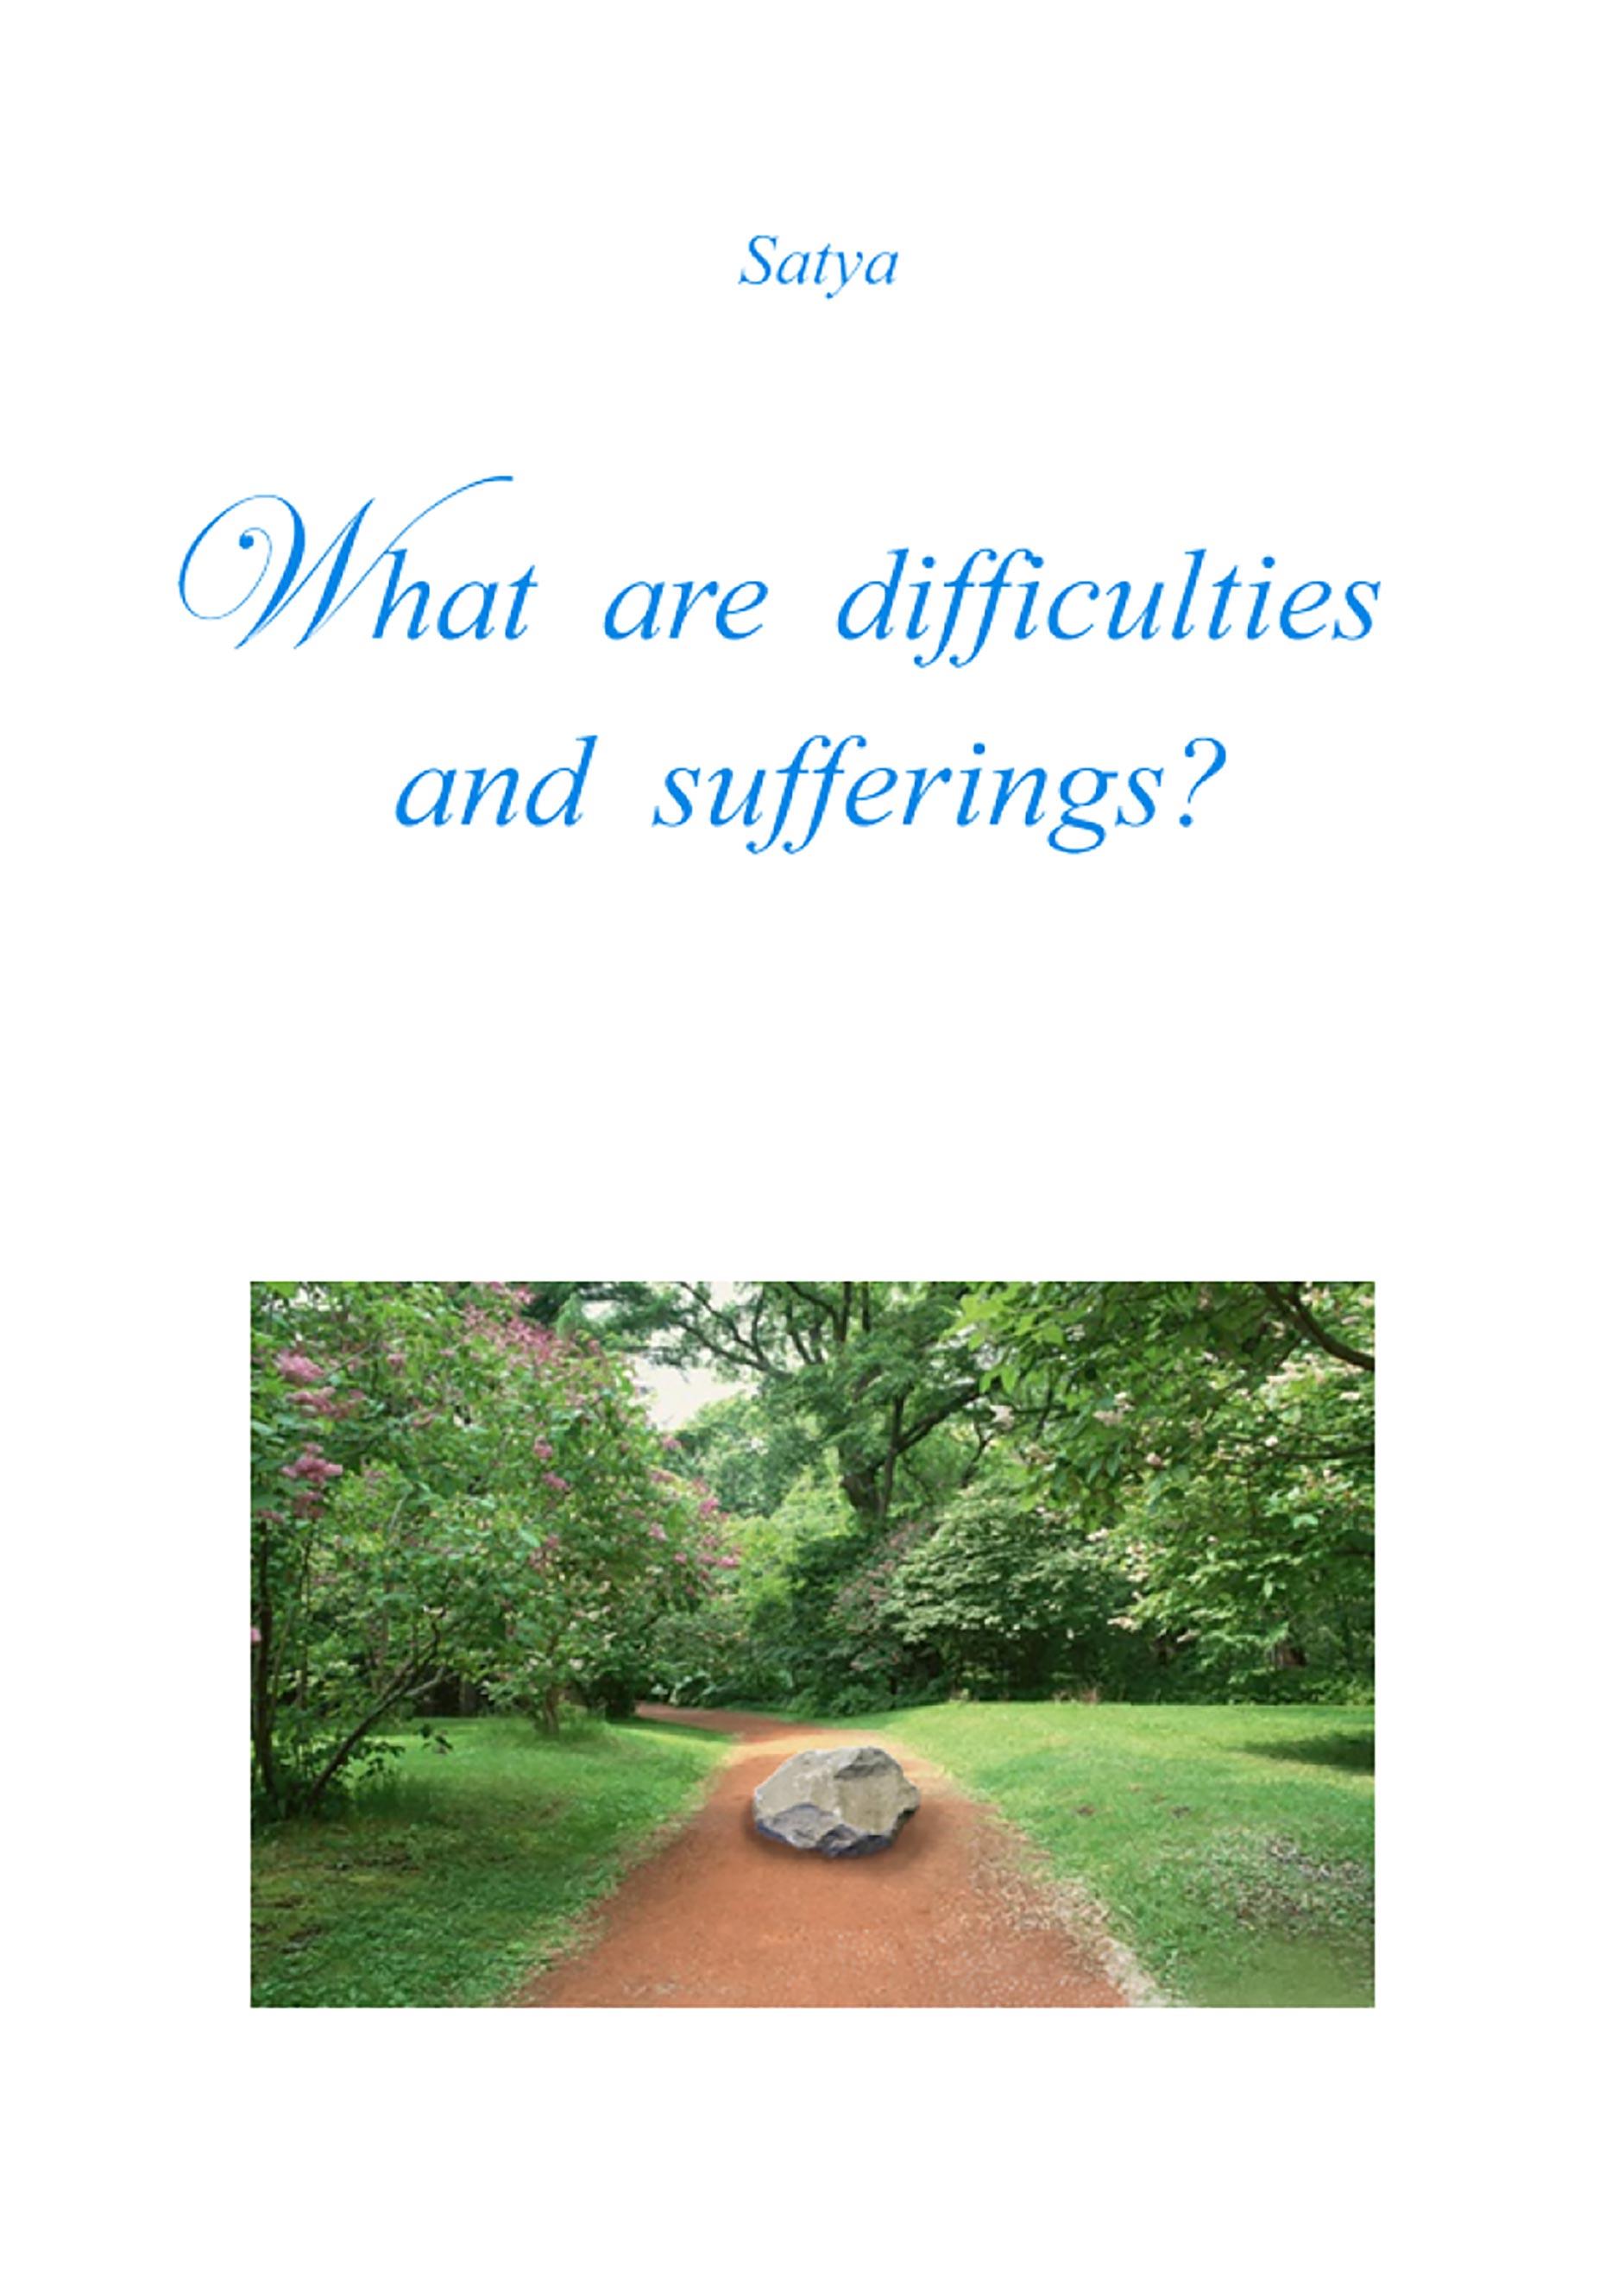 What are difficulties and sufferings?